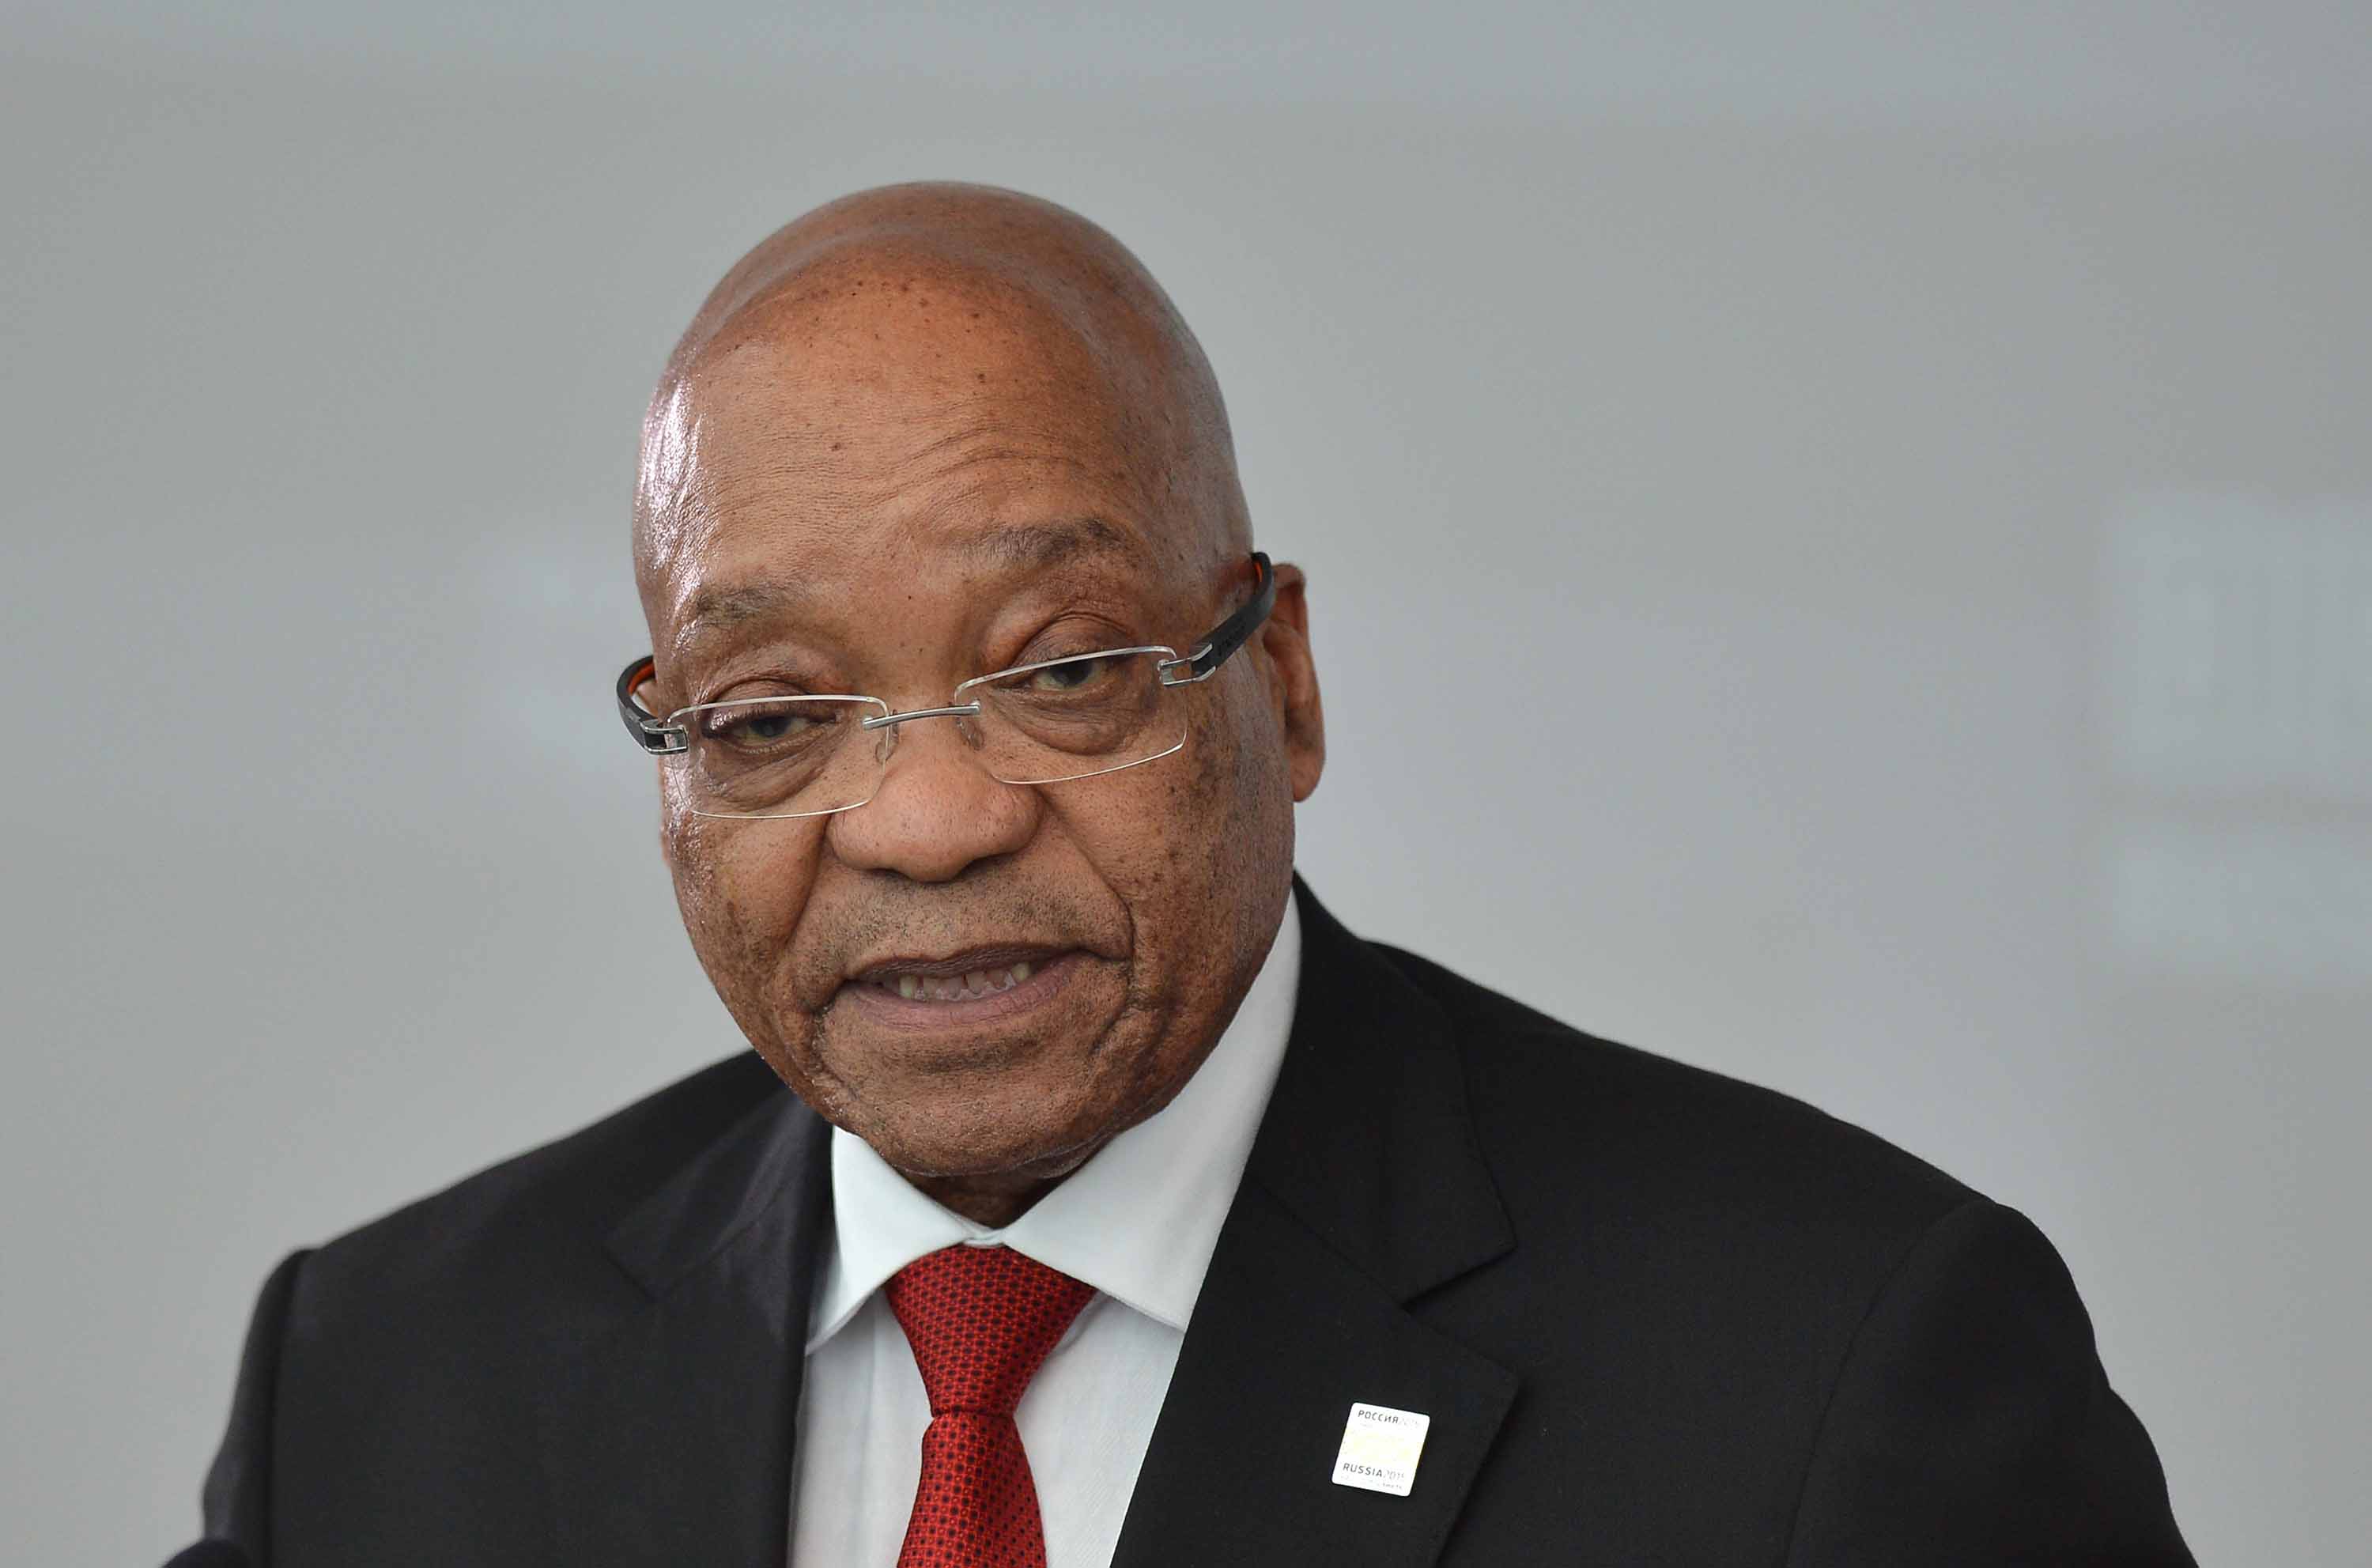 Jacob Zuma, Former South African President, Is Arrested - The New